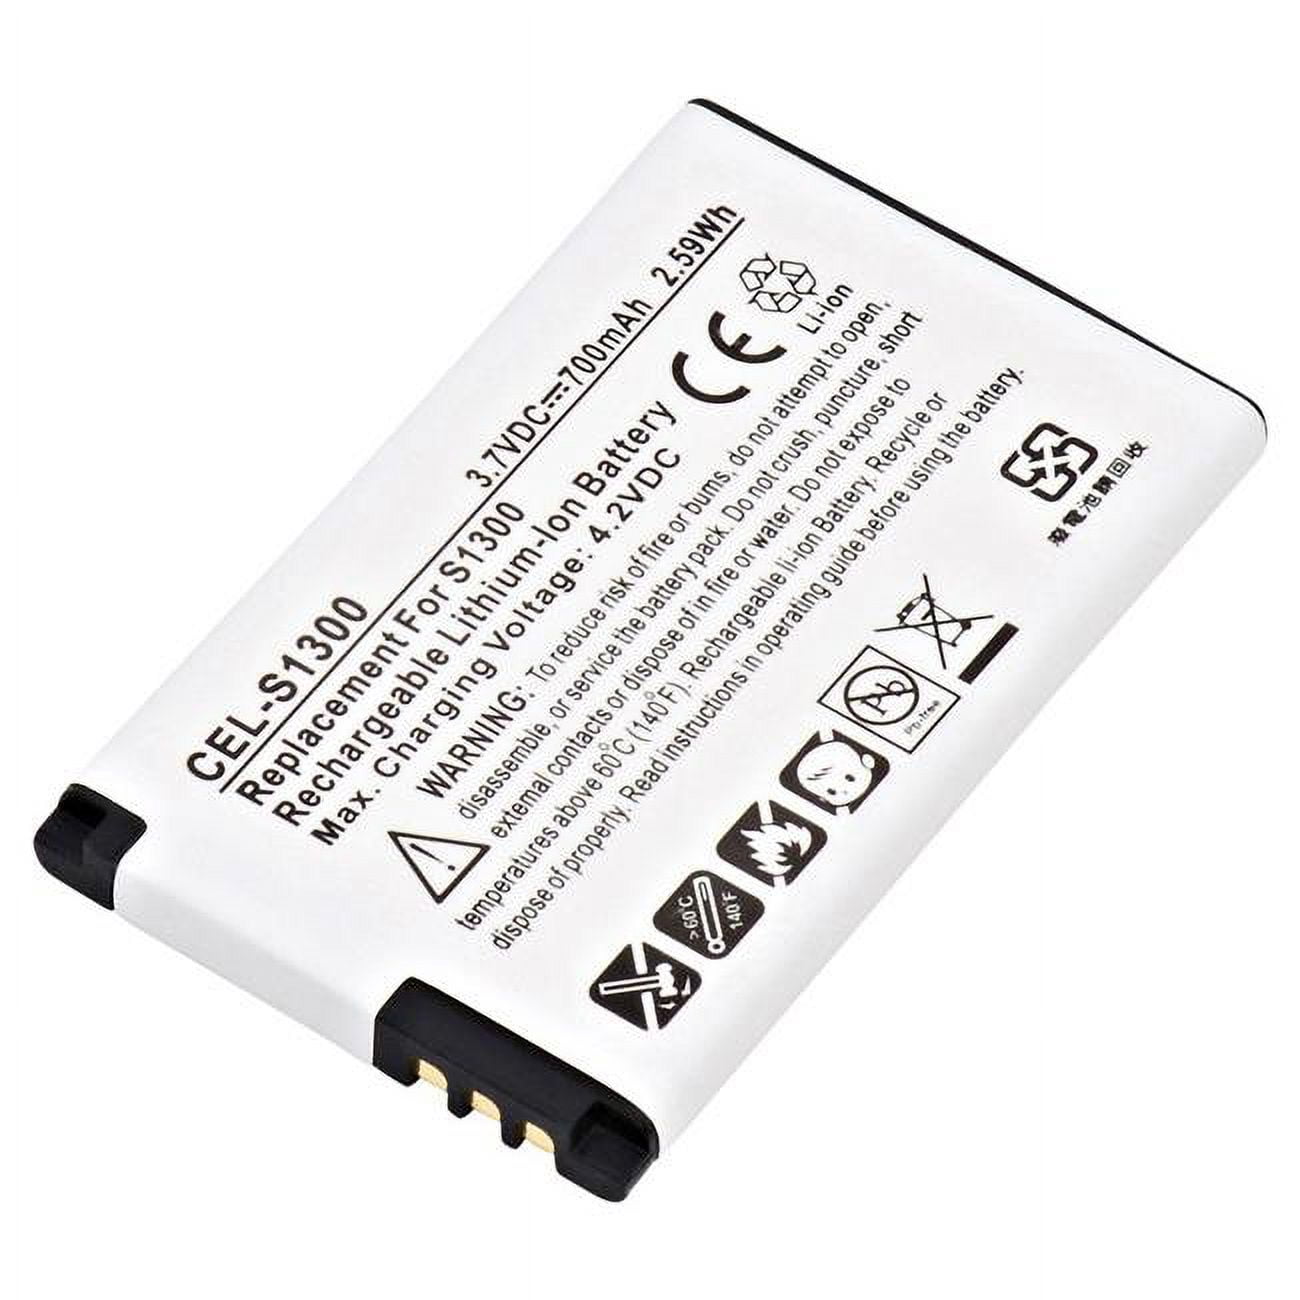 Picture of Ultralast CEL-S1300 3.7V & 800 mAh Replacement Lithium-Ion Battery for Kyocera Domino S1310 Cellular Phone